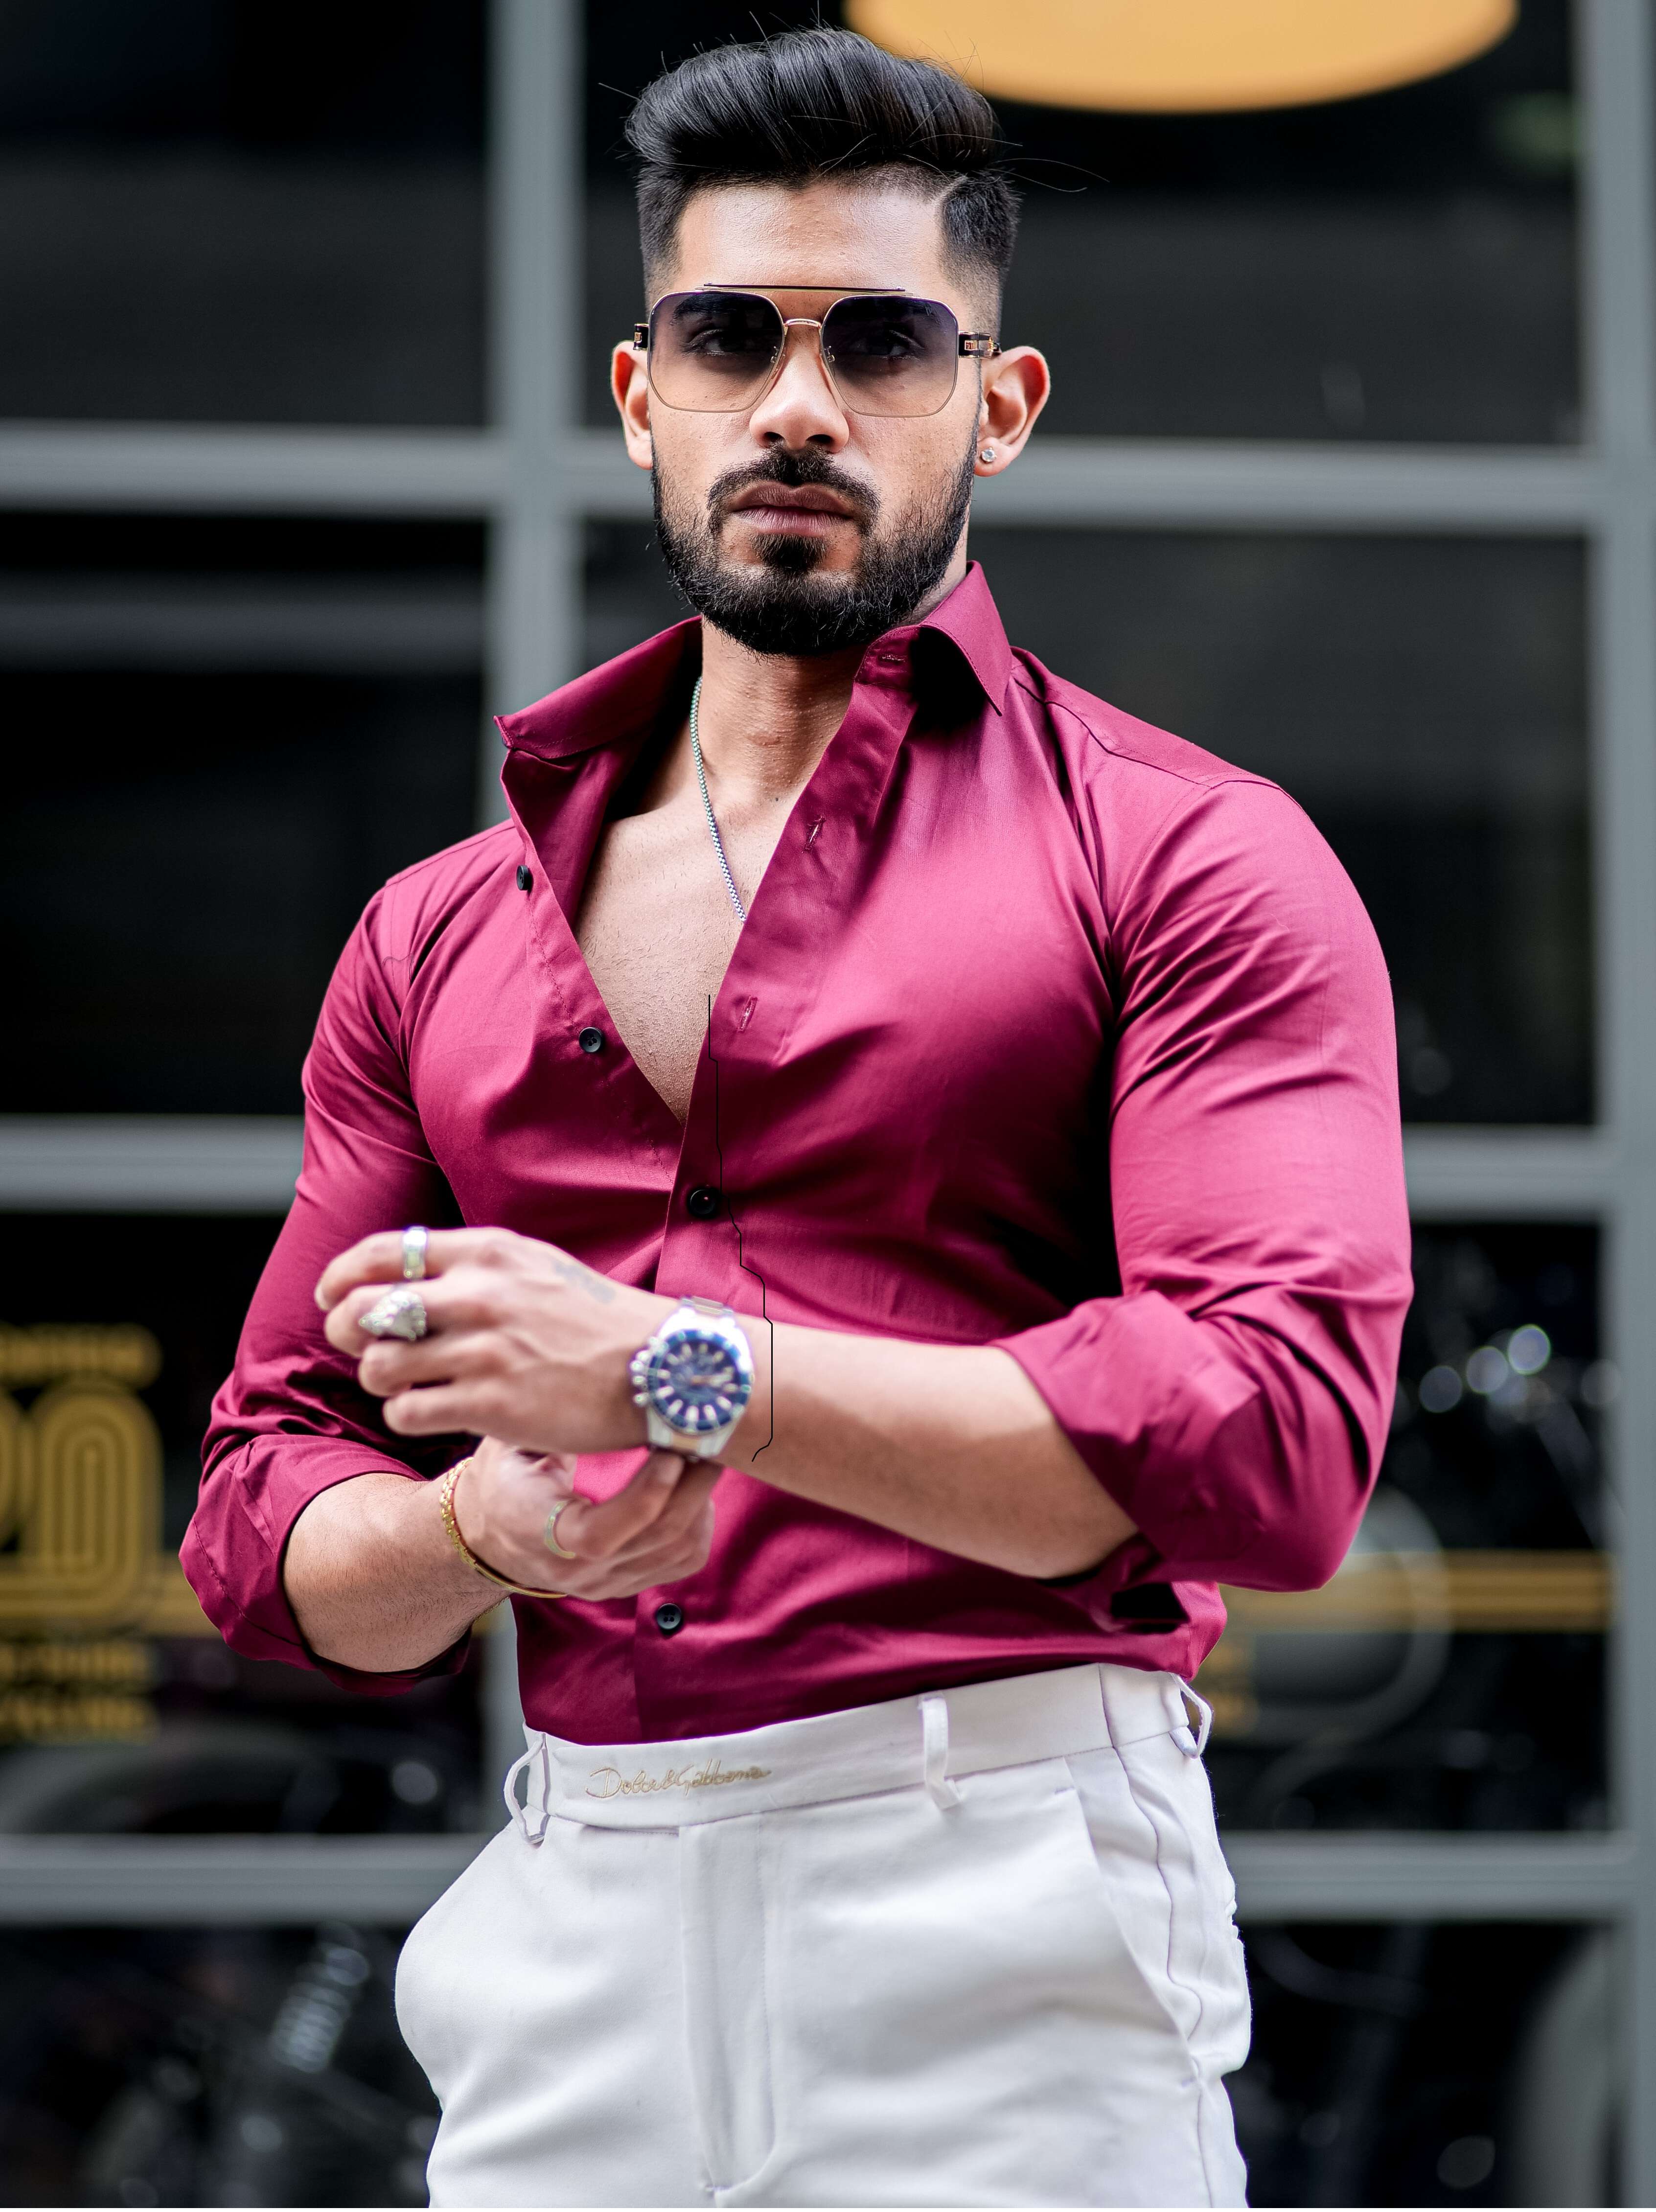 Formy Wine Berry Regular Fit Luxury Satin Cotton Shirt For Men's – The  Foomer